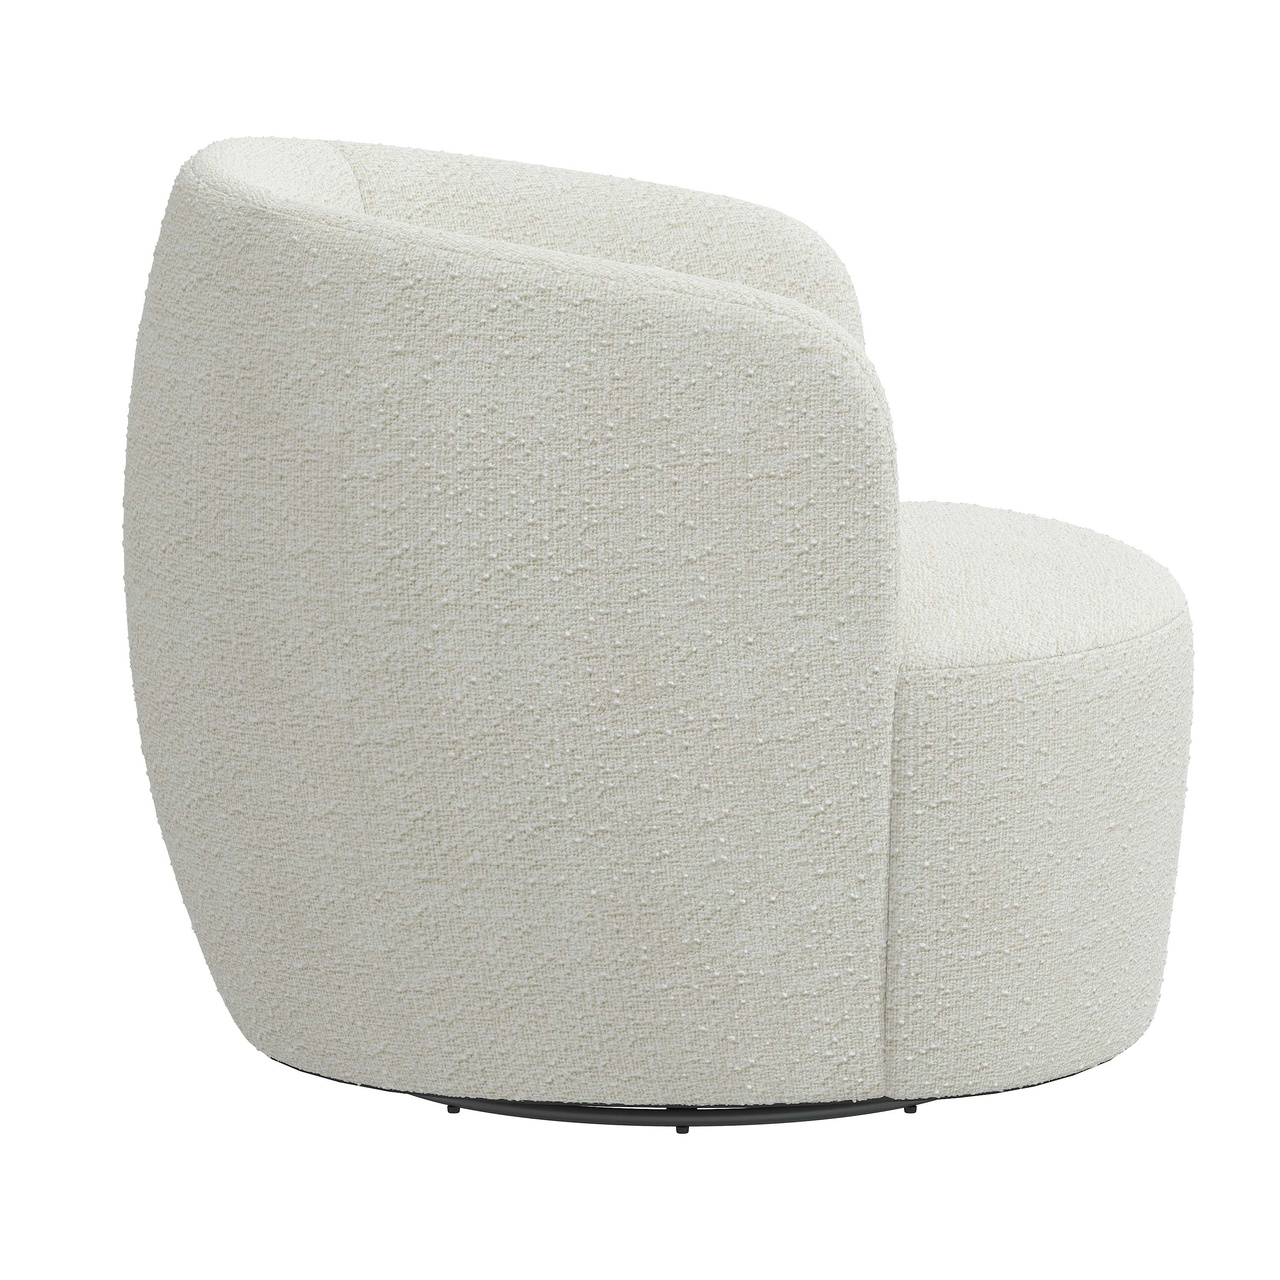 Collette Swivel Chair - Image 2